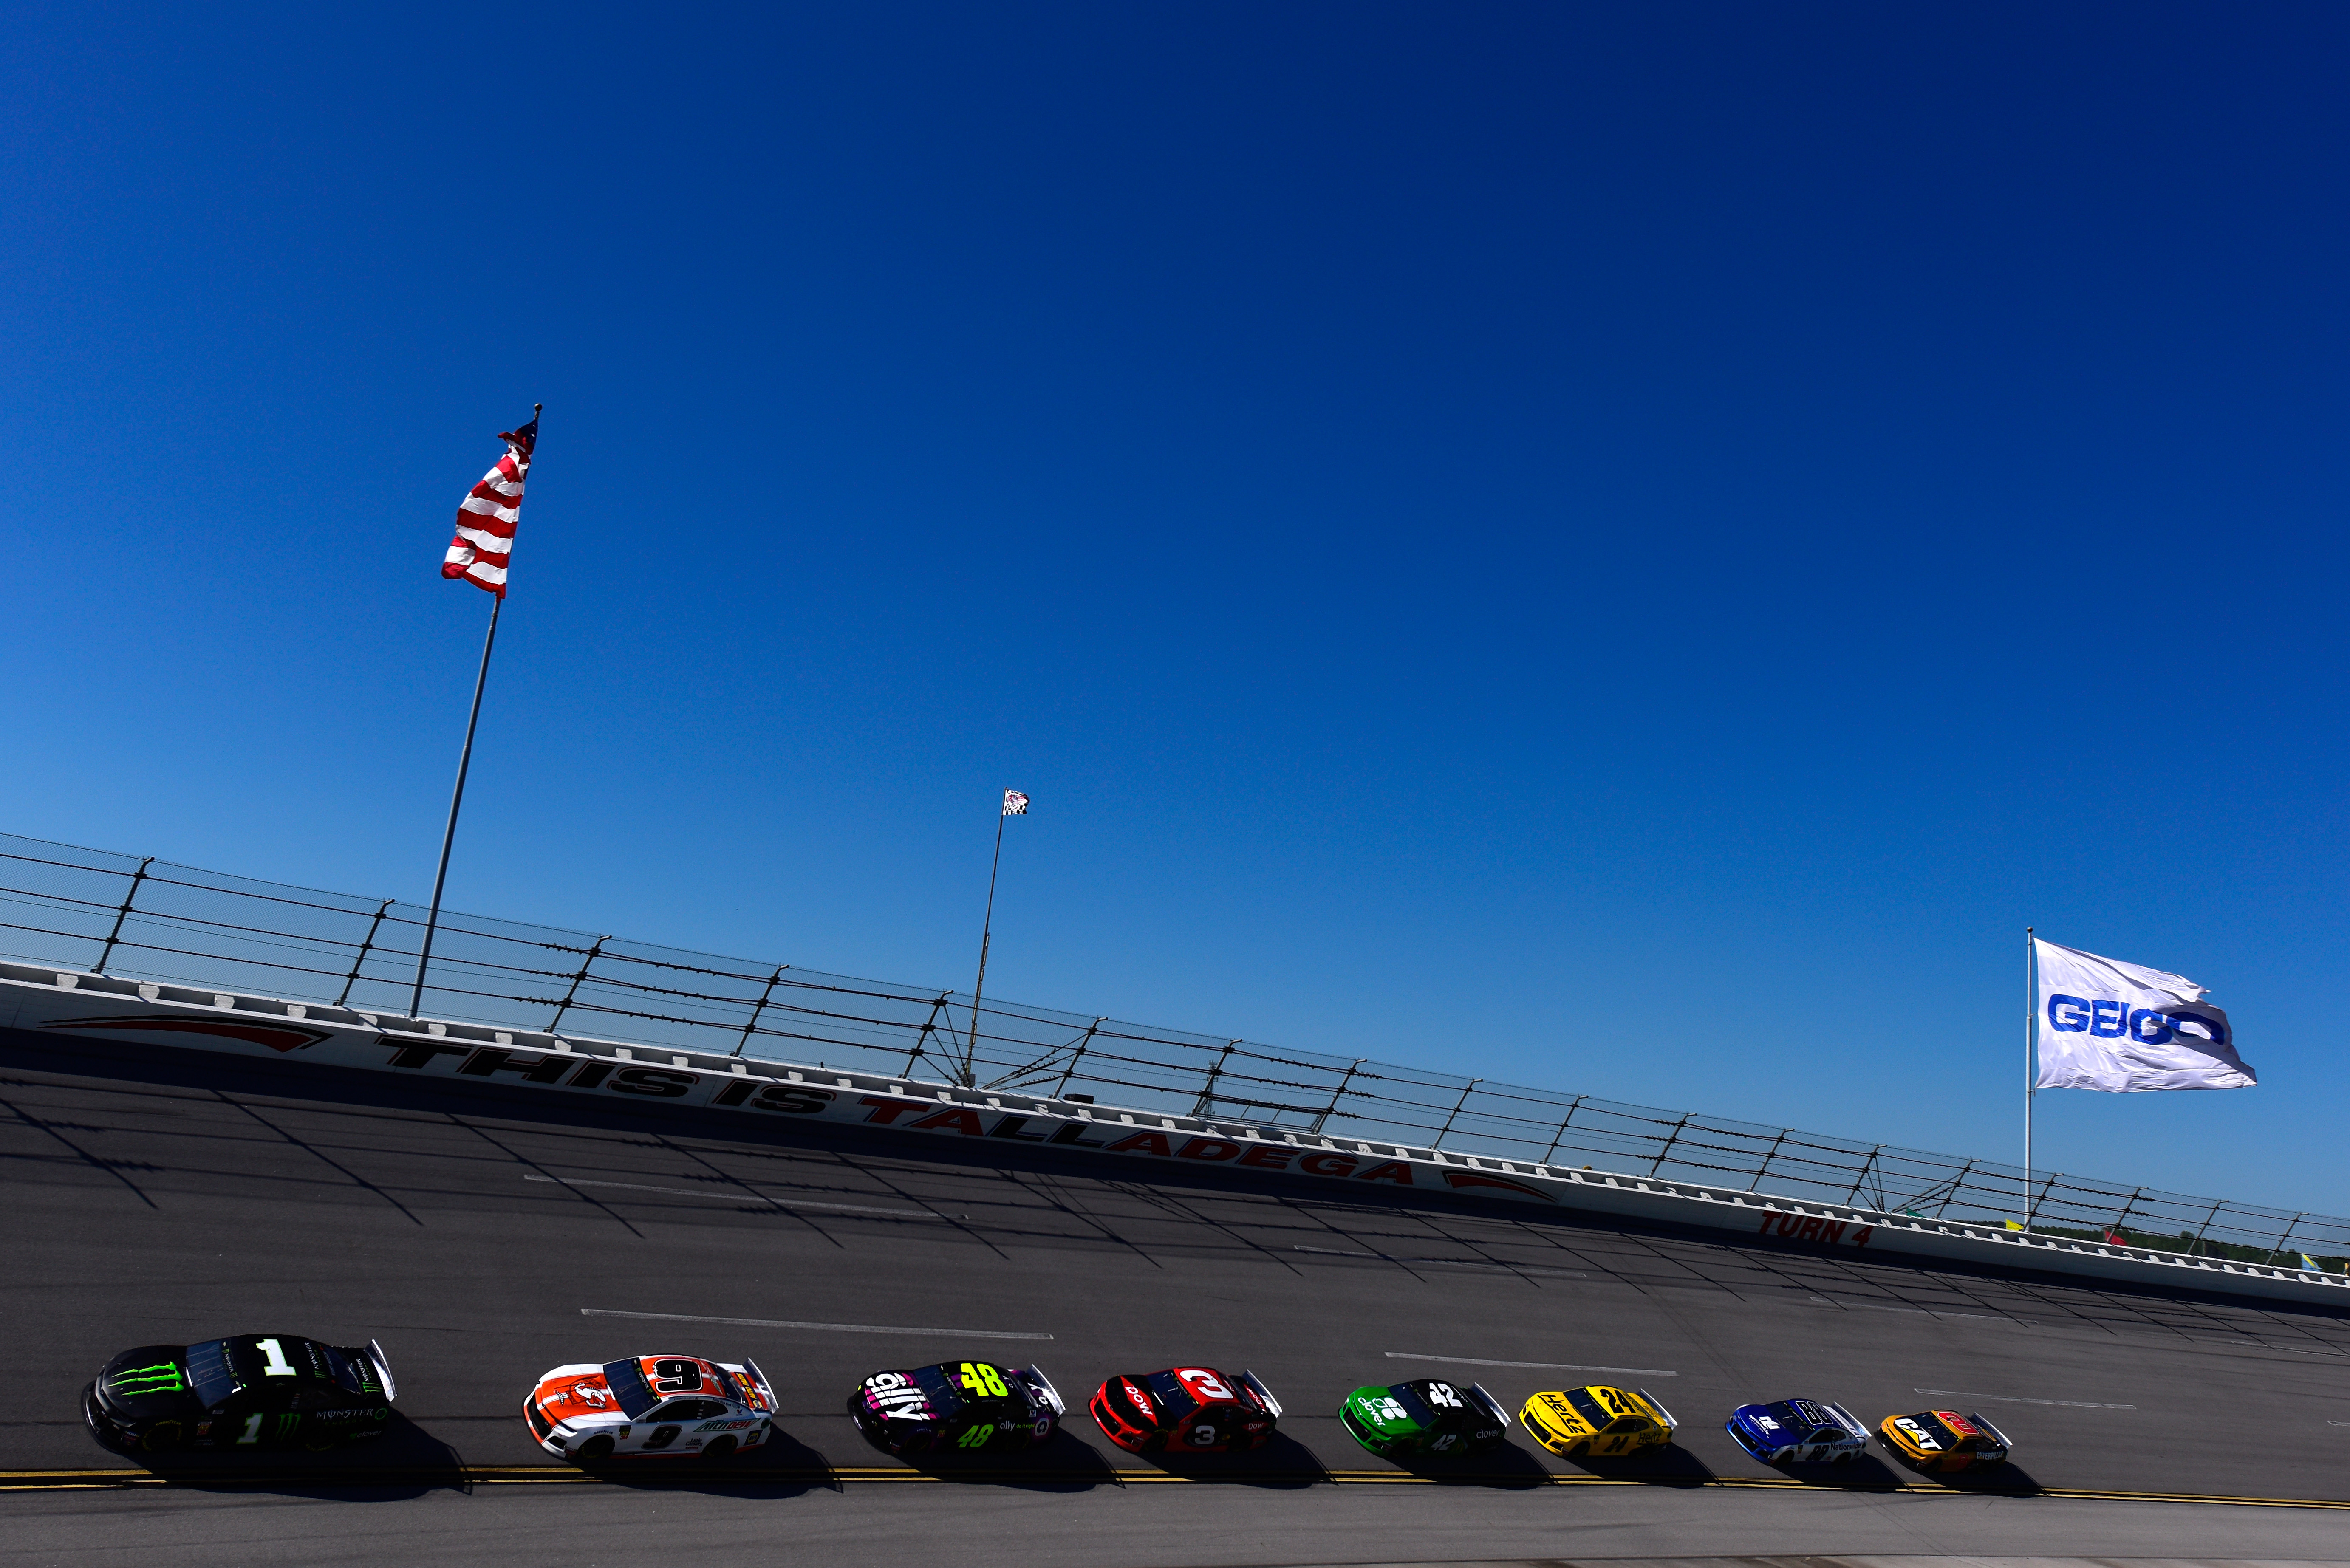 Don't you dare put that GEICO 500 at Talladega evil on me, Ricky Bobby! (Photo Credit: Jared C. Tilton/Getty Images)